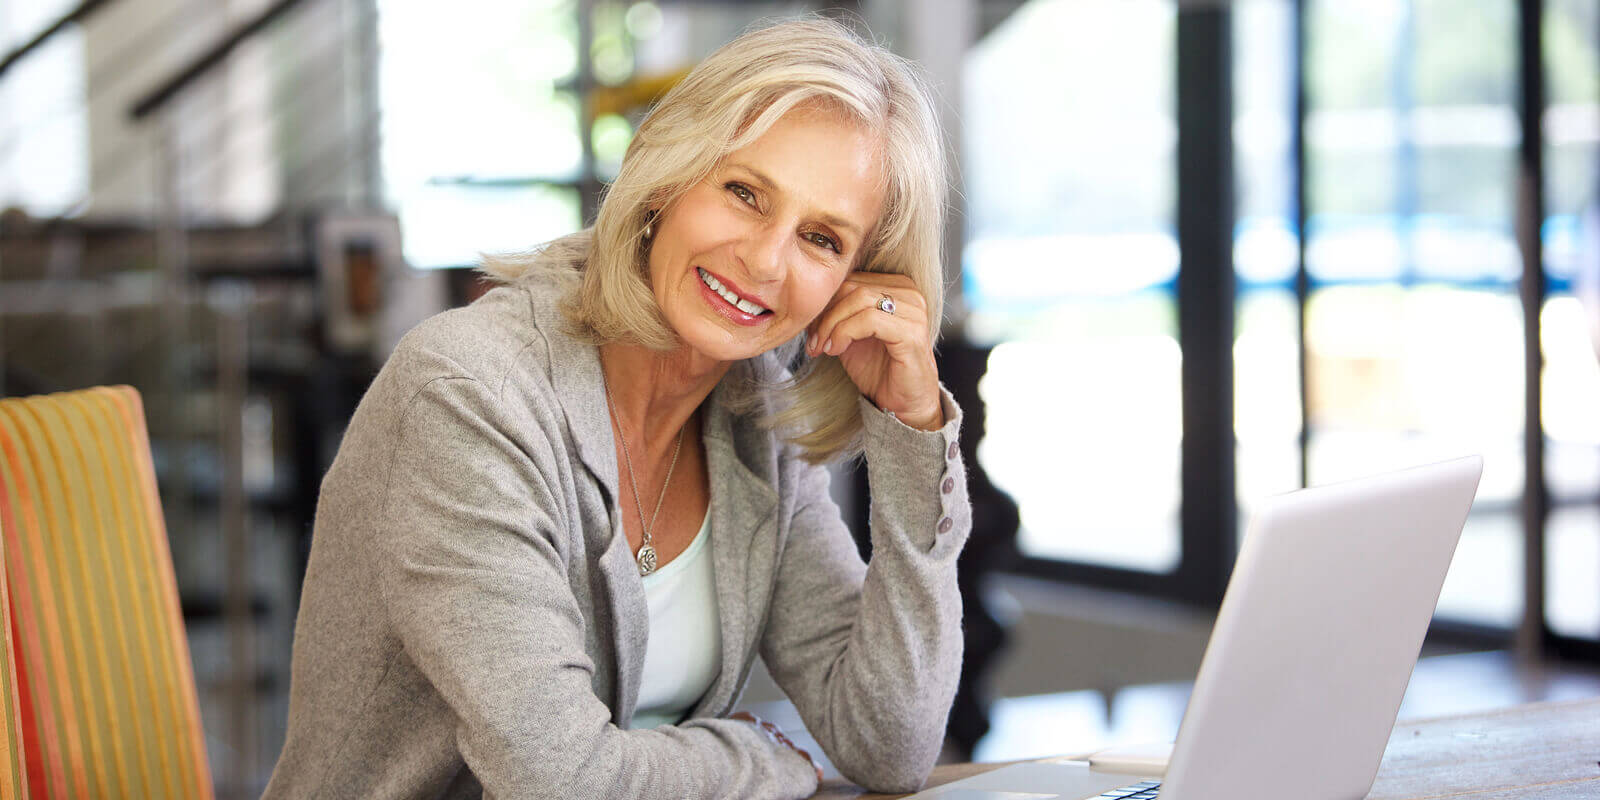 Ways to Improve your Job Application if You’re a 50+ Year Old Job Seeker